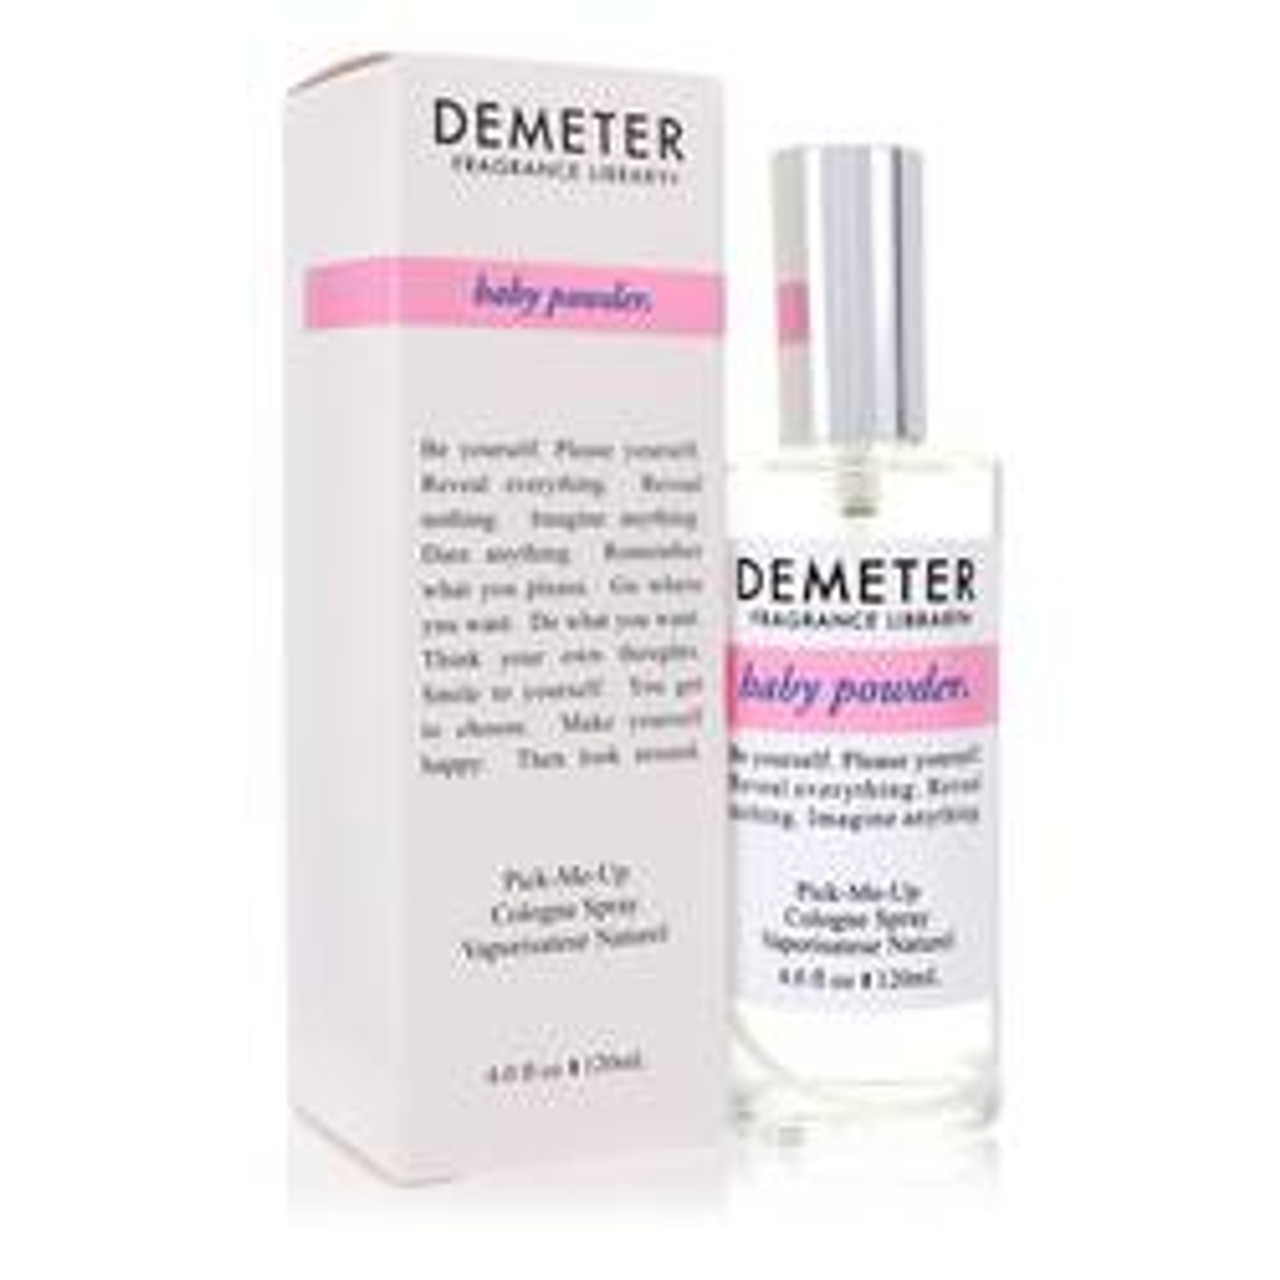 Demeter Baby Powder Perfume By Demeter Cologne Spray 4 oz for Women - [From 79.50 - Choose pk Qty ] - *Ships from Miami